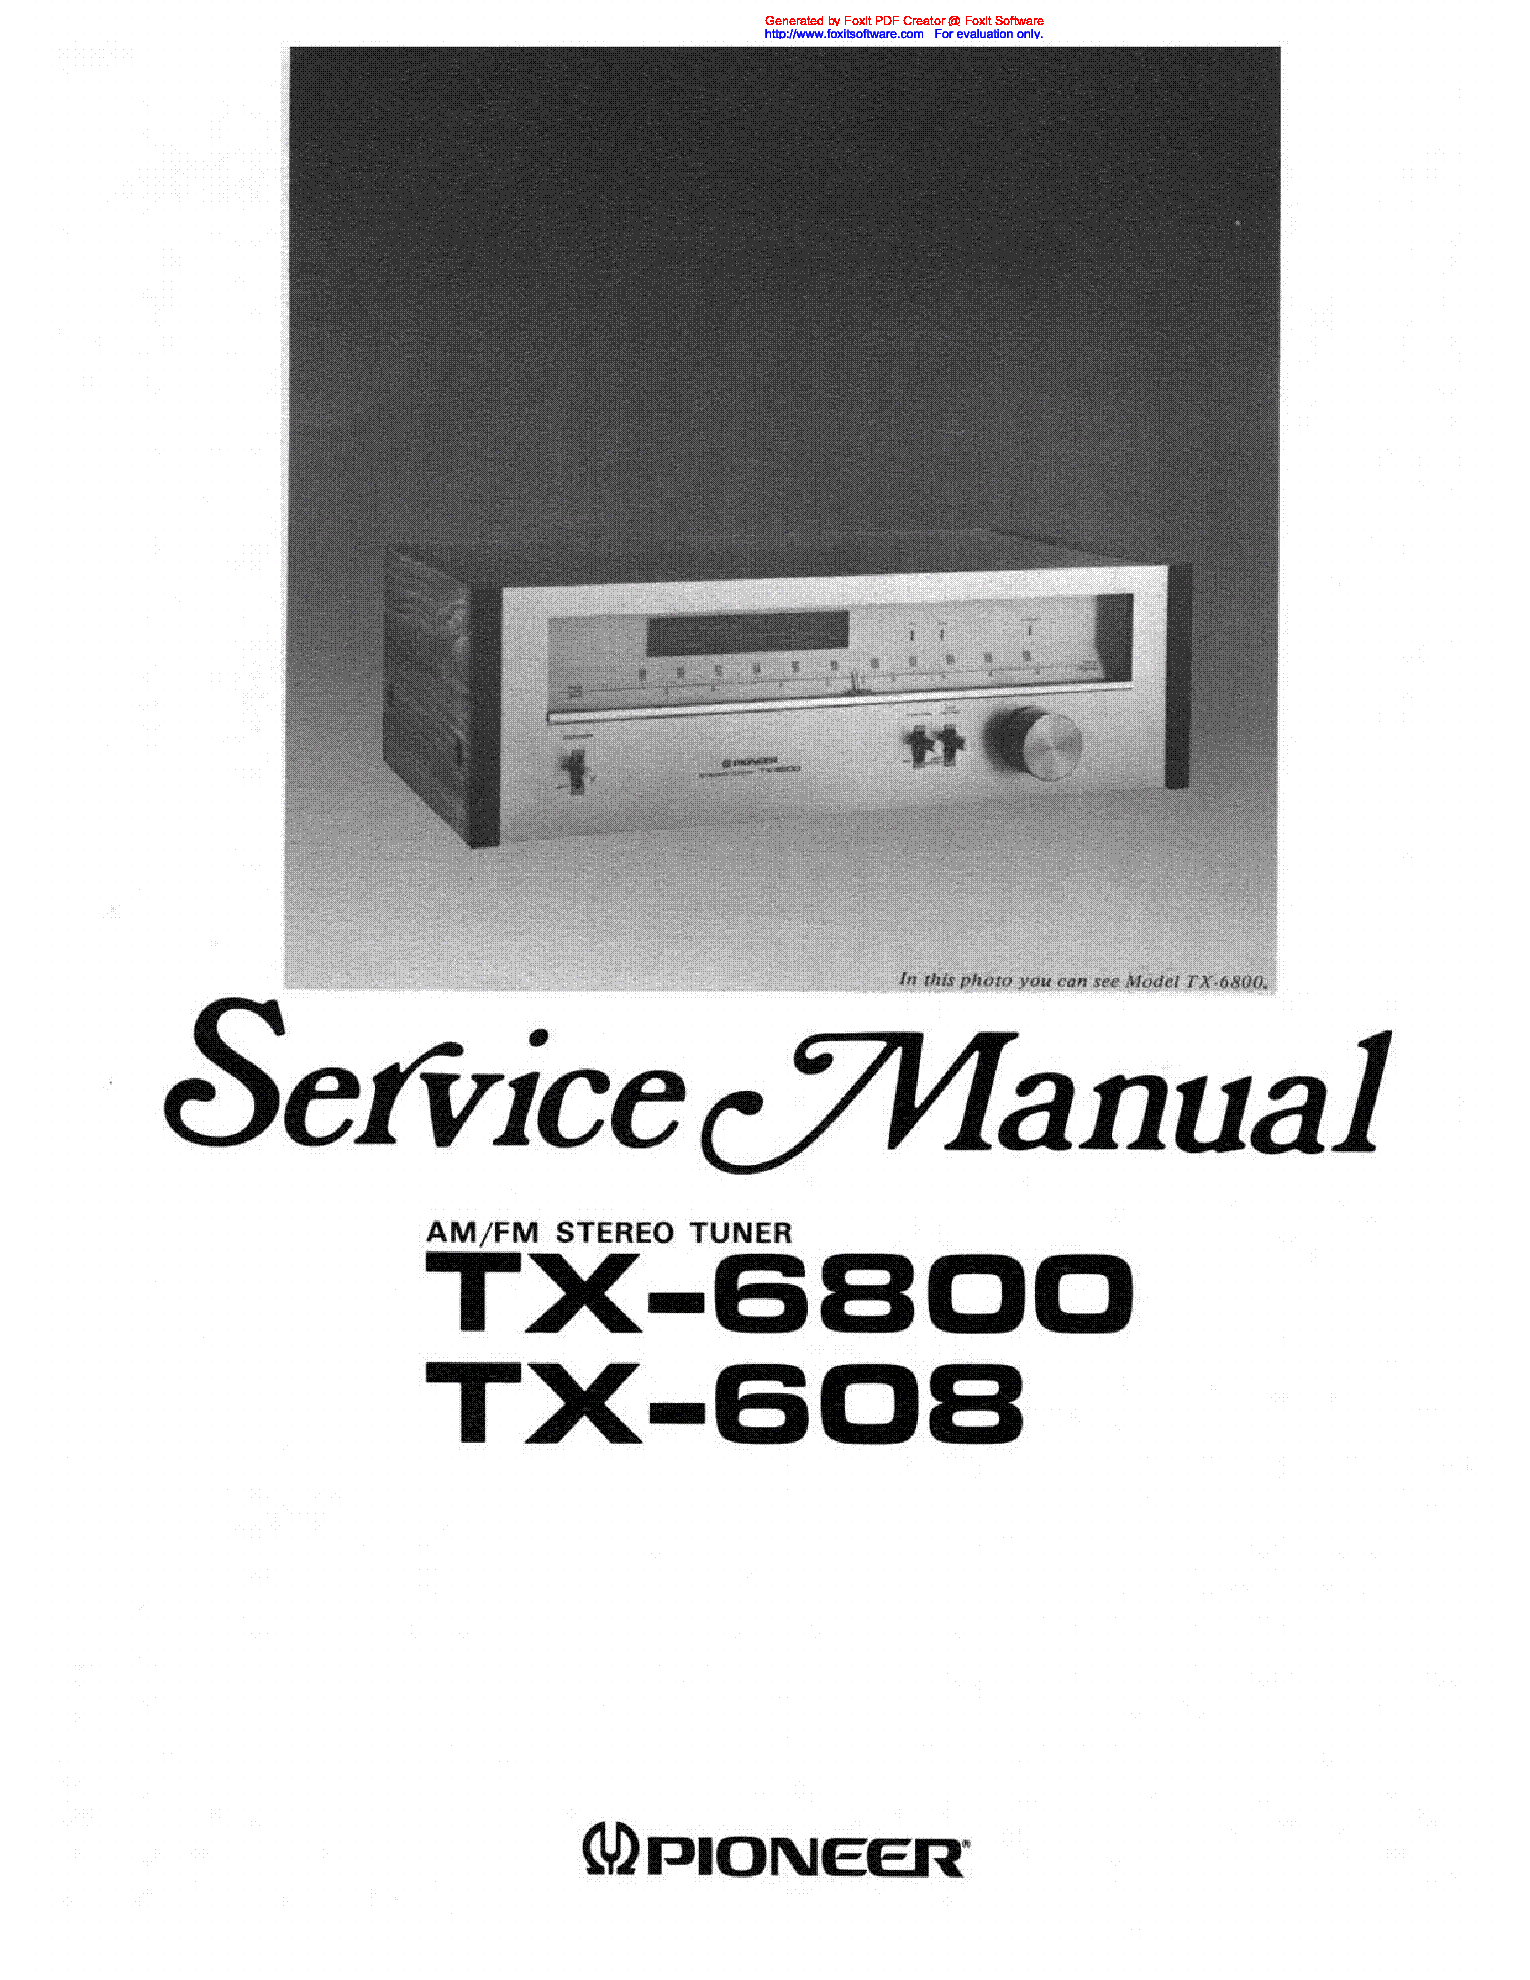 PIONEER TX-608 6800 SM service manual (1st page)